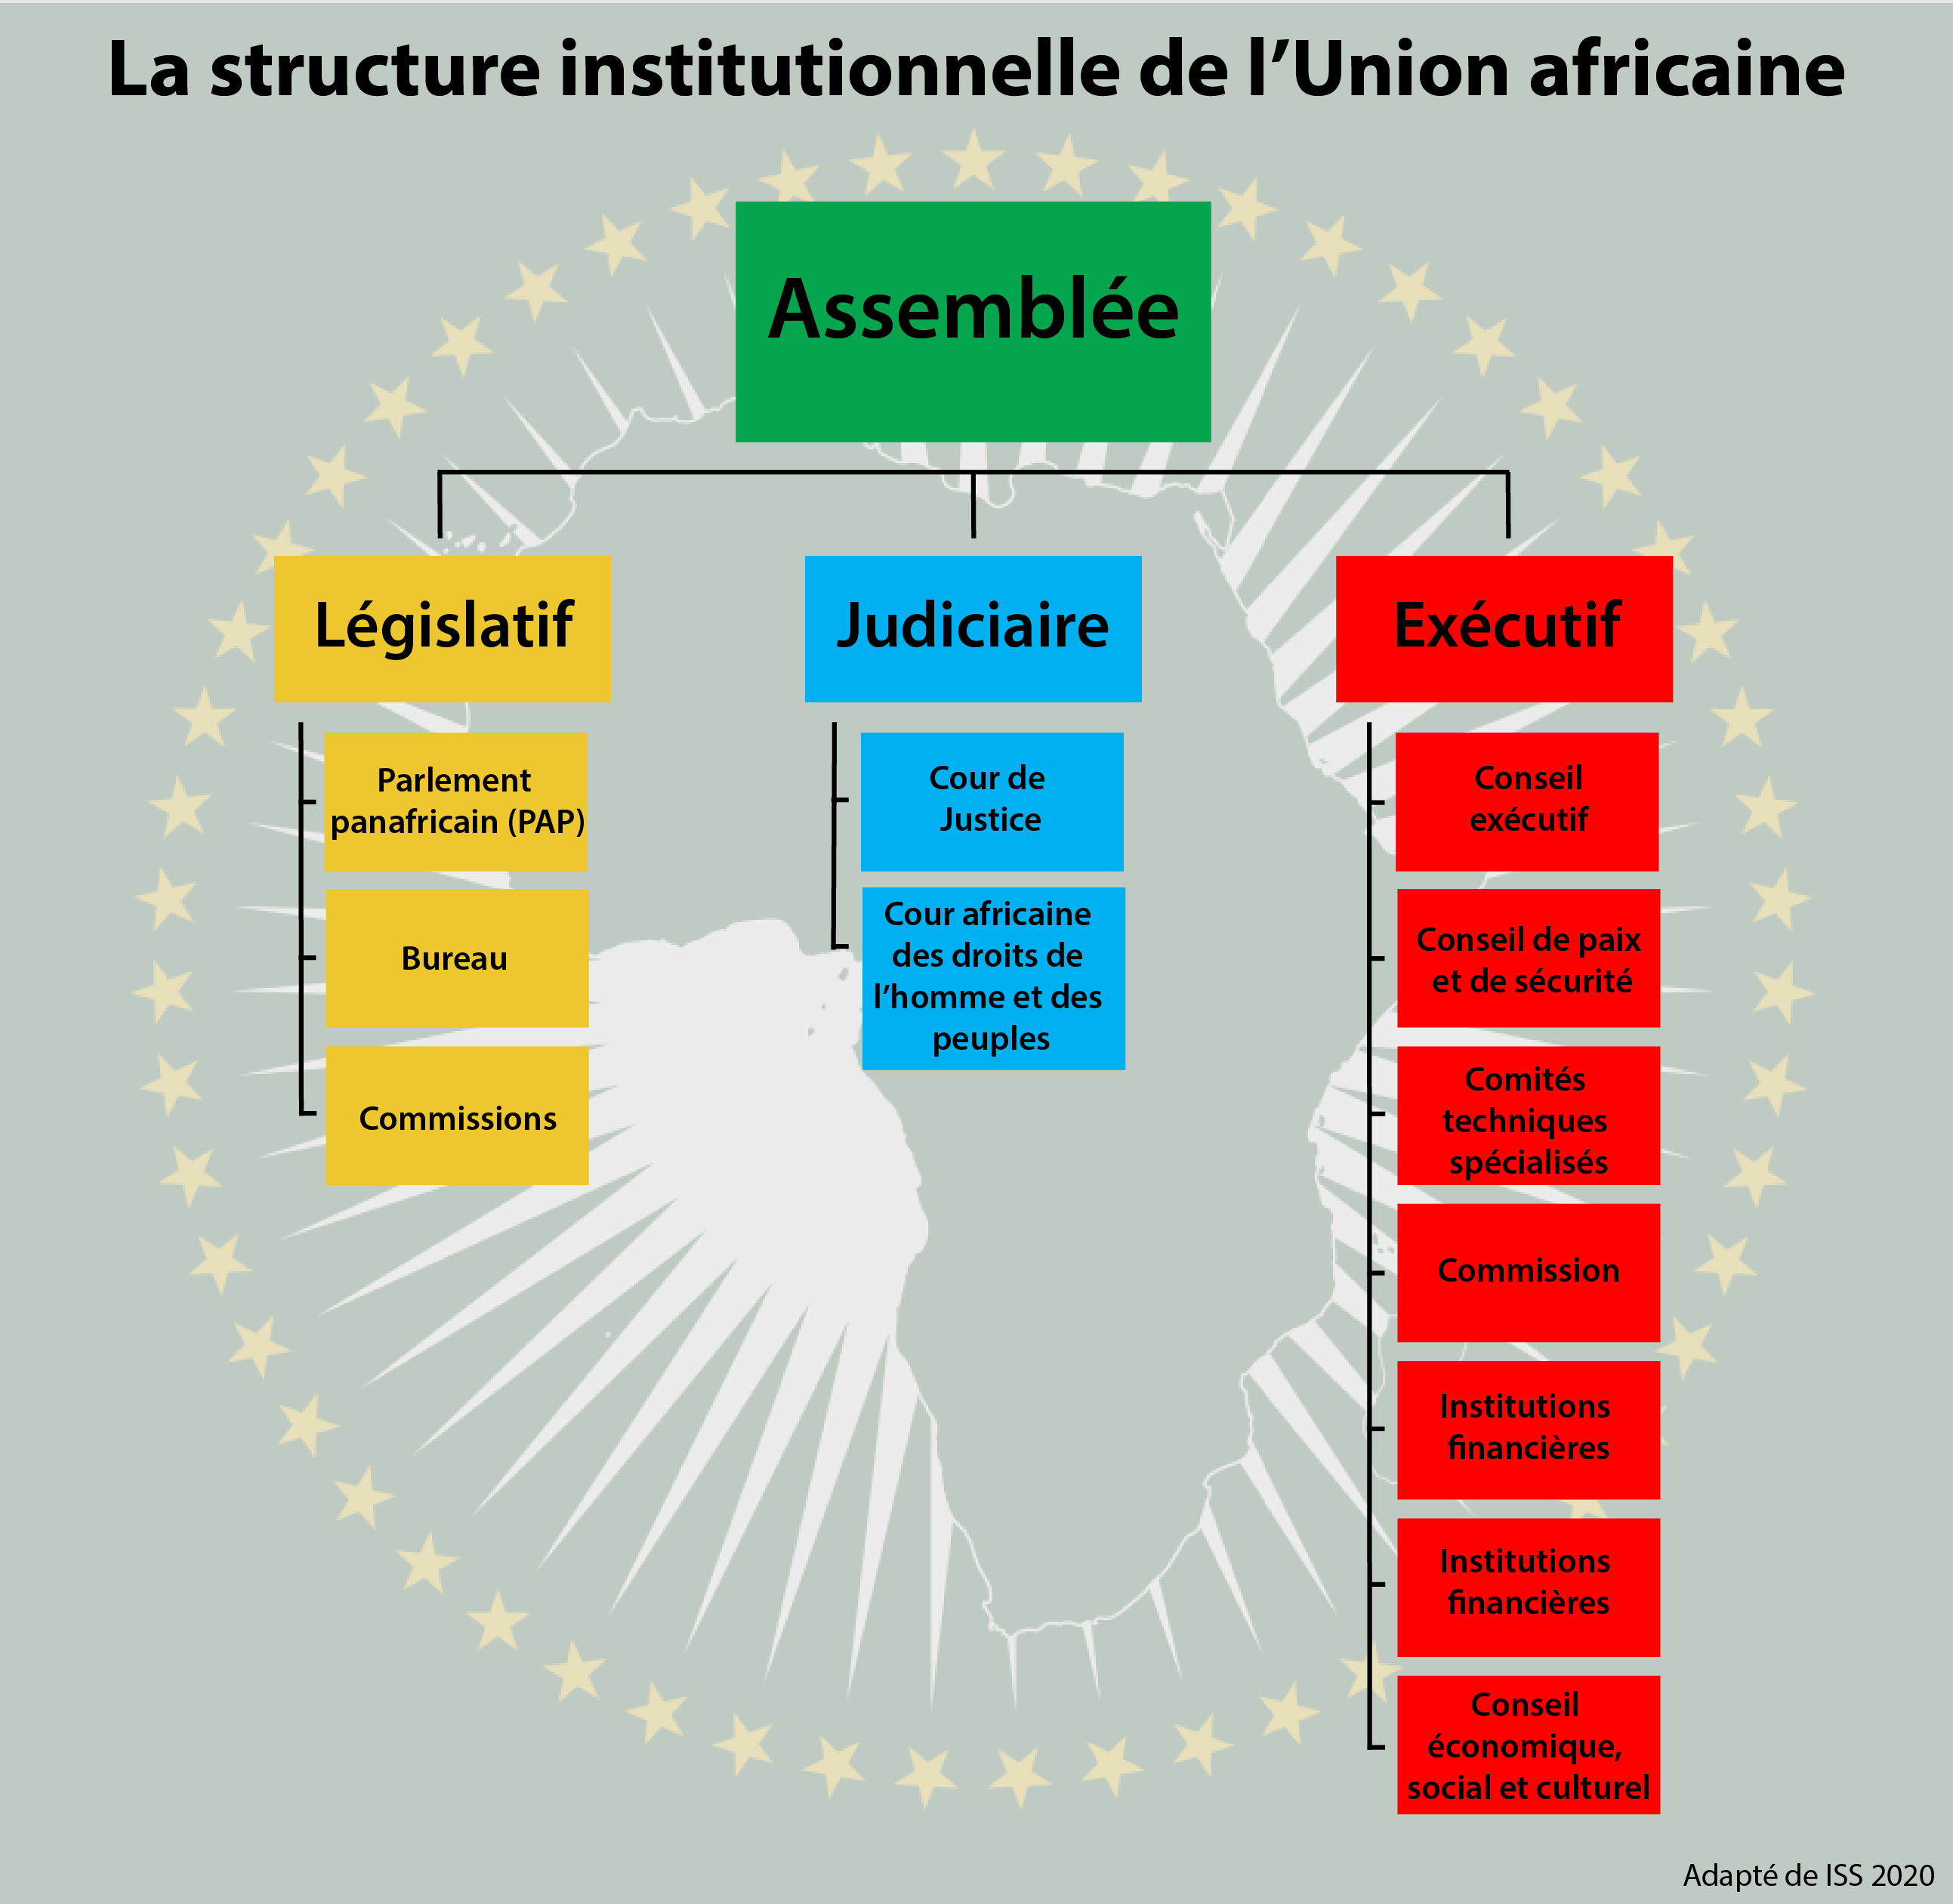 The Institutional Structure of the African Union